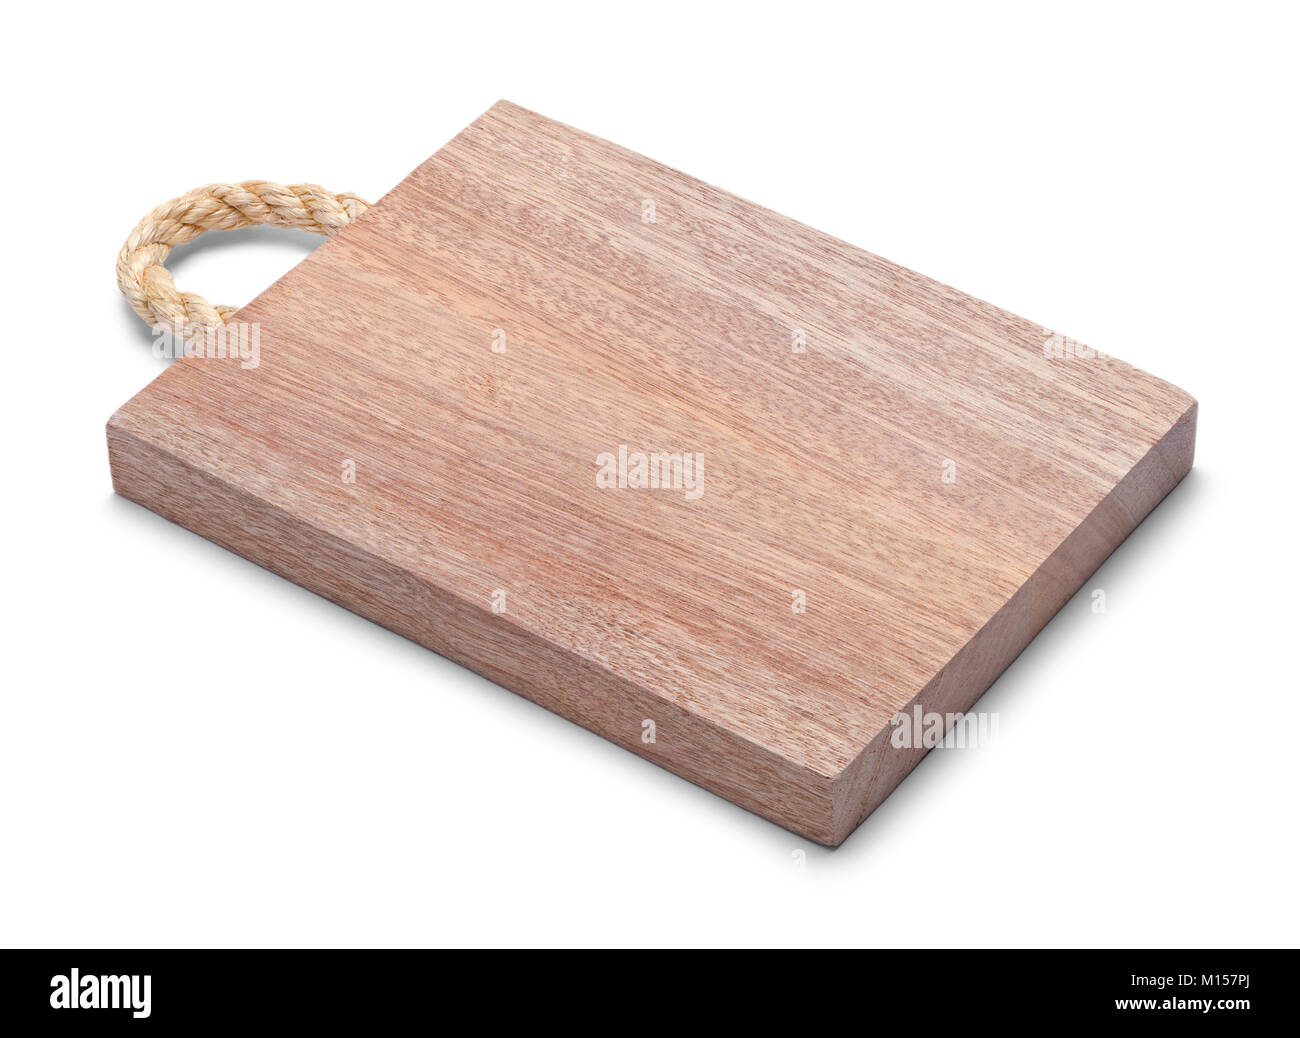 Wood Cutting Board with a Rope Handle Isolated on a White Background. Stock Photo